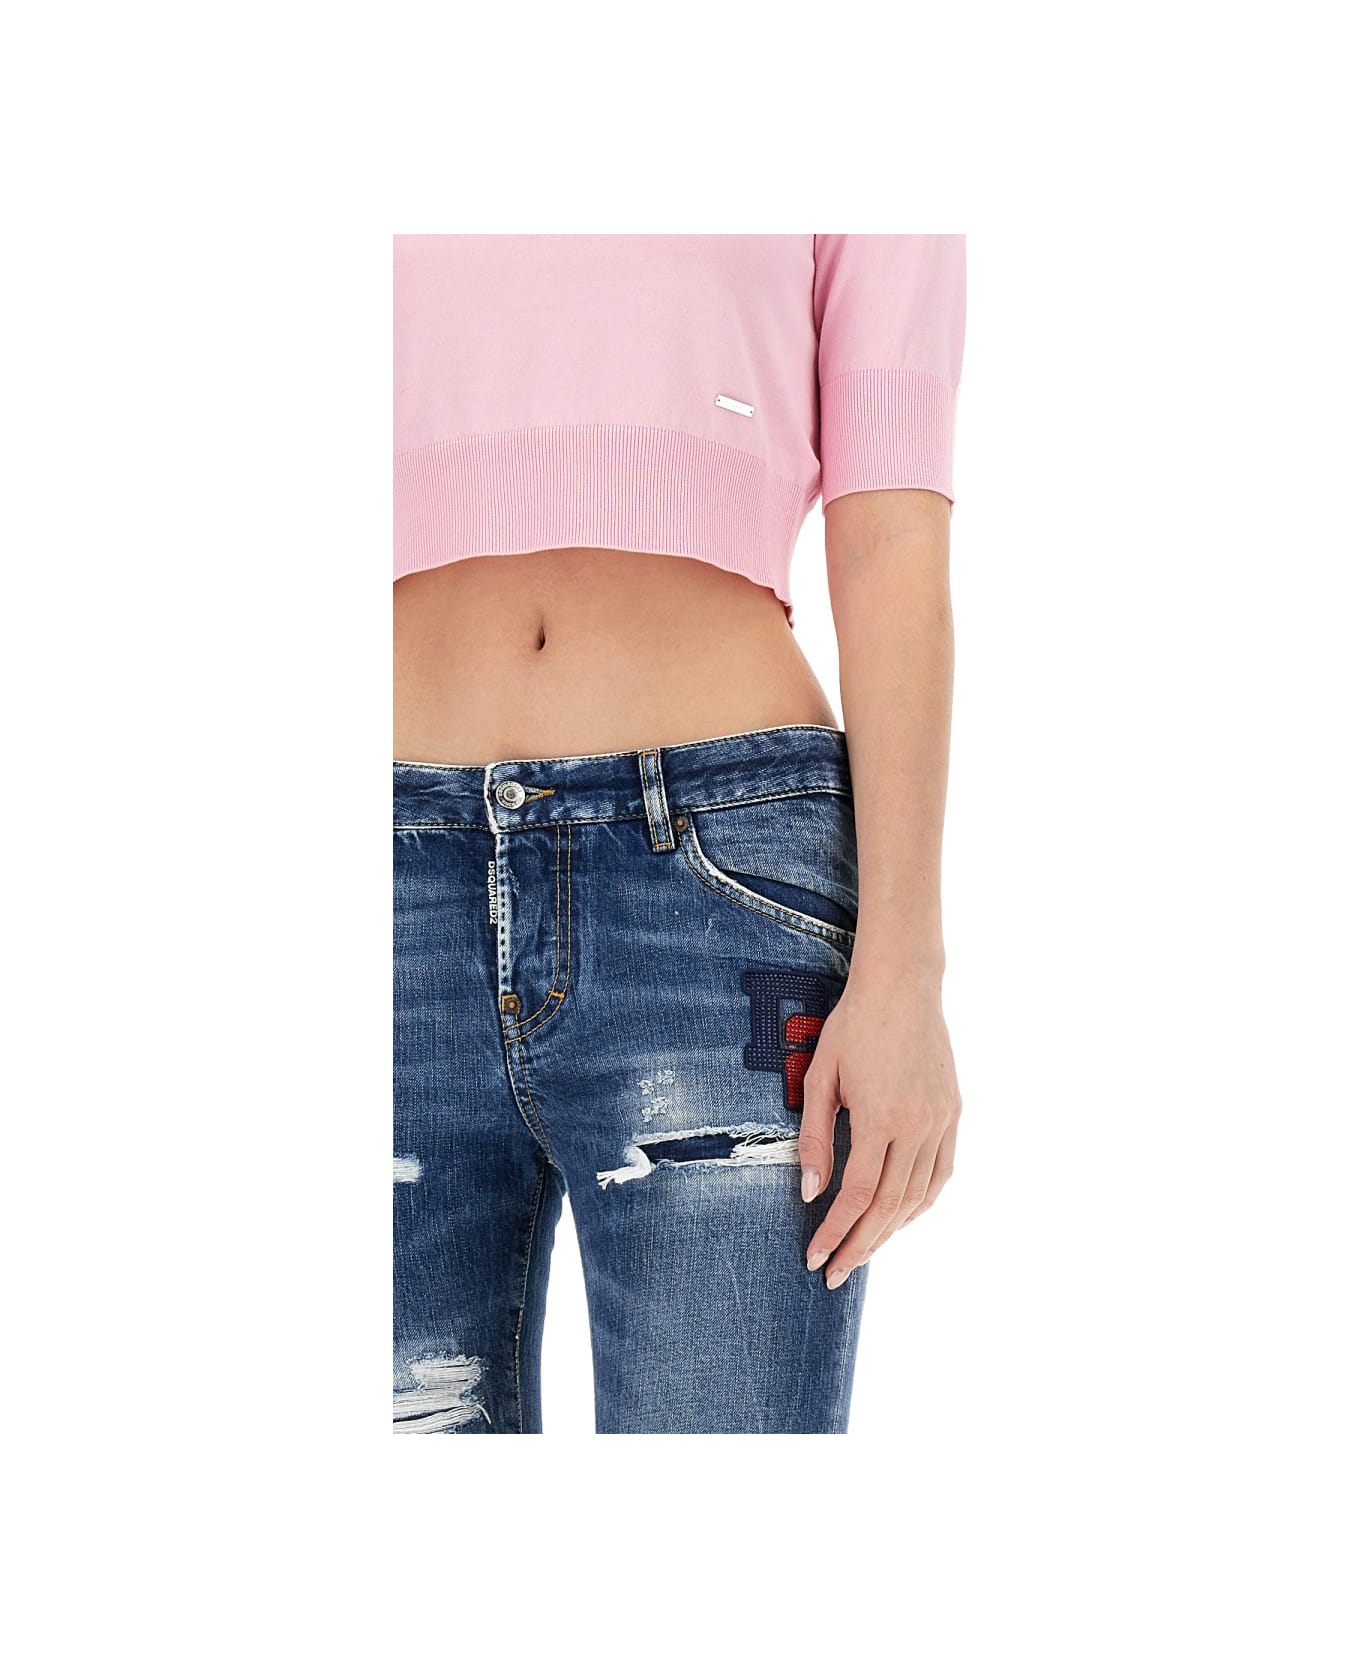 Dsquared2 Cropped Shirt - PINK Tシャツ